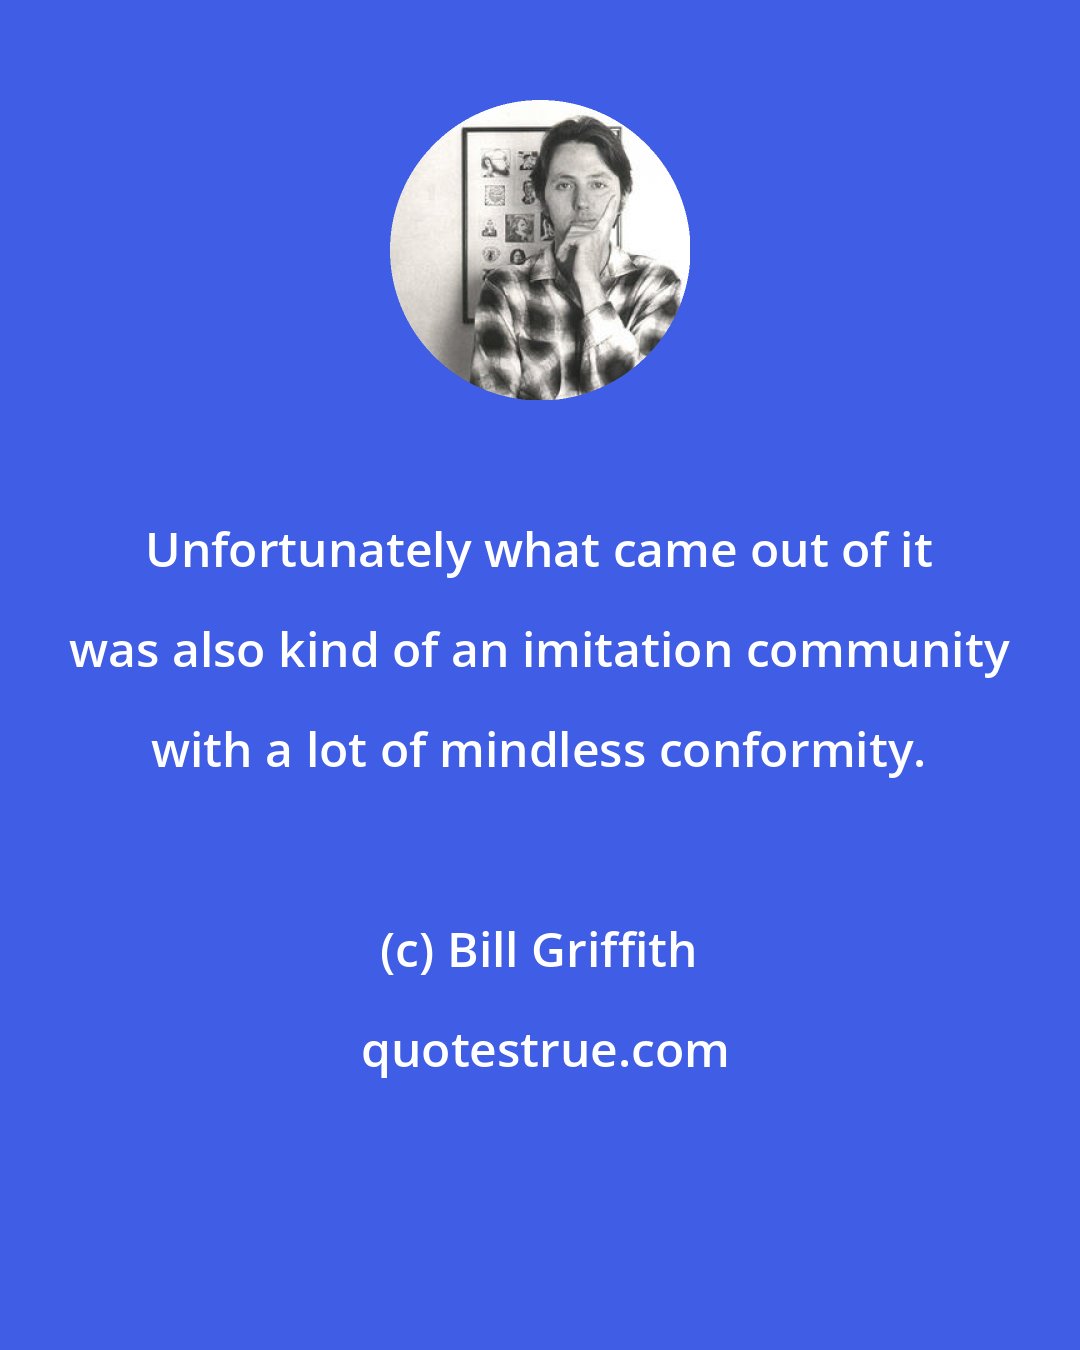 Bill Griffith: Unfortunately what came out of it was also kind of an imitation community with a lot of mindless conformity.